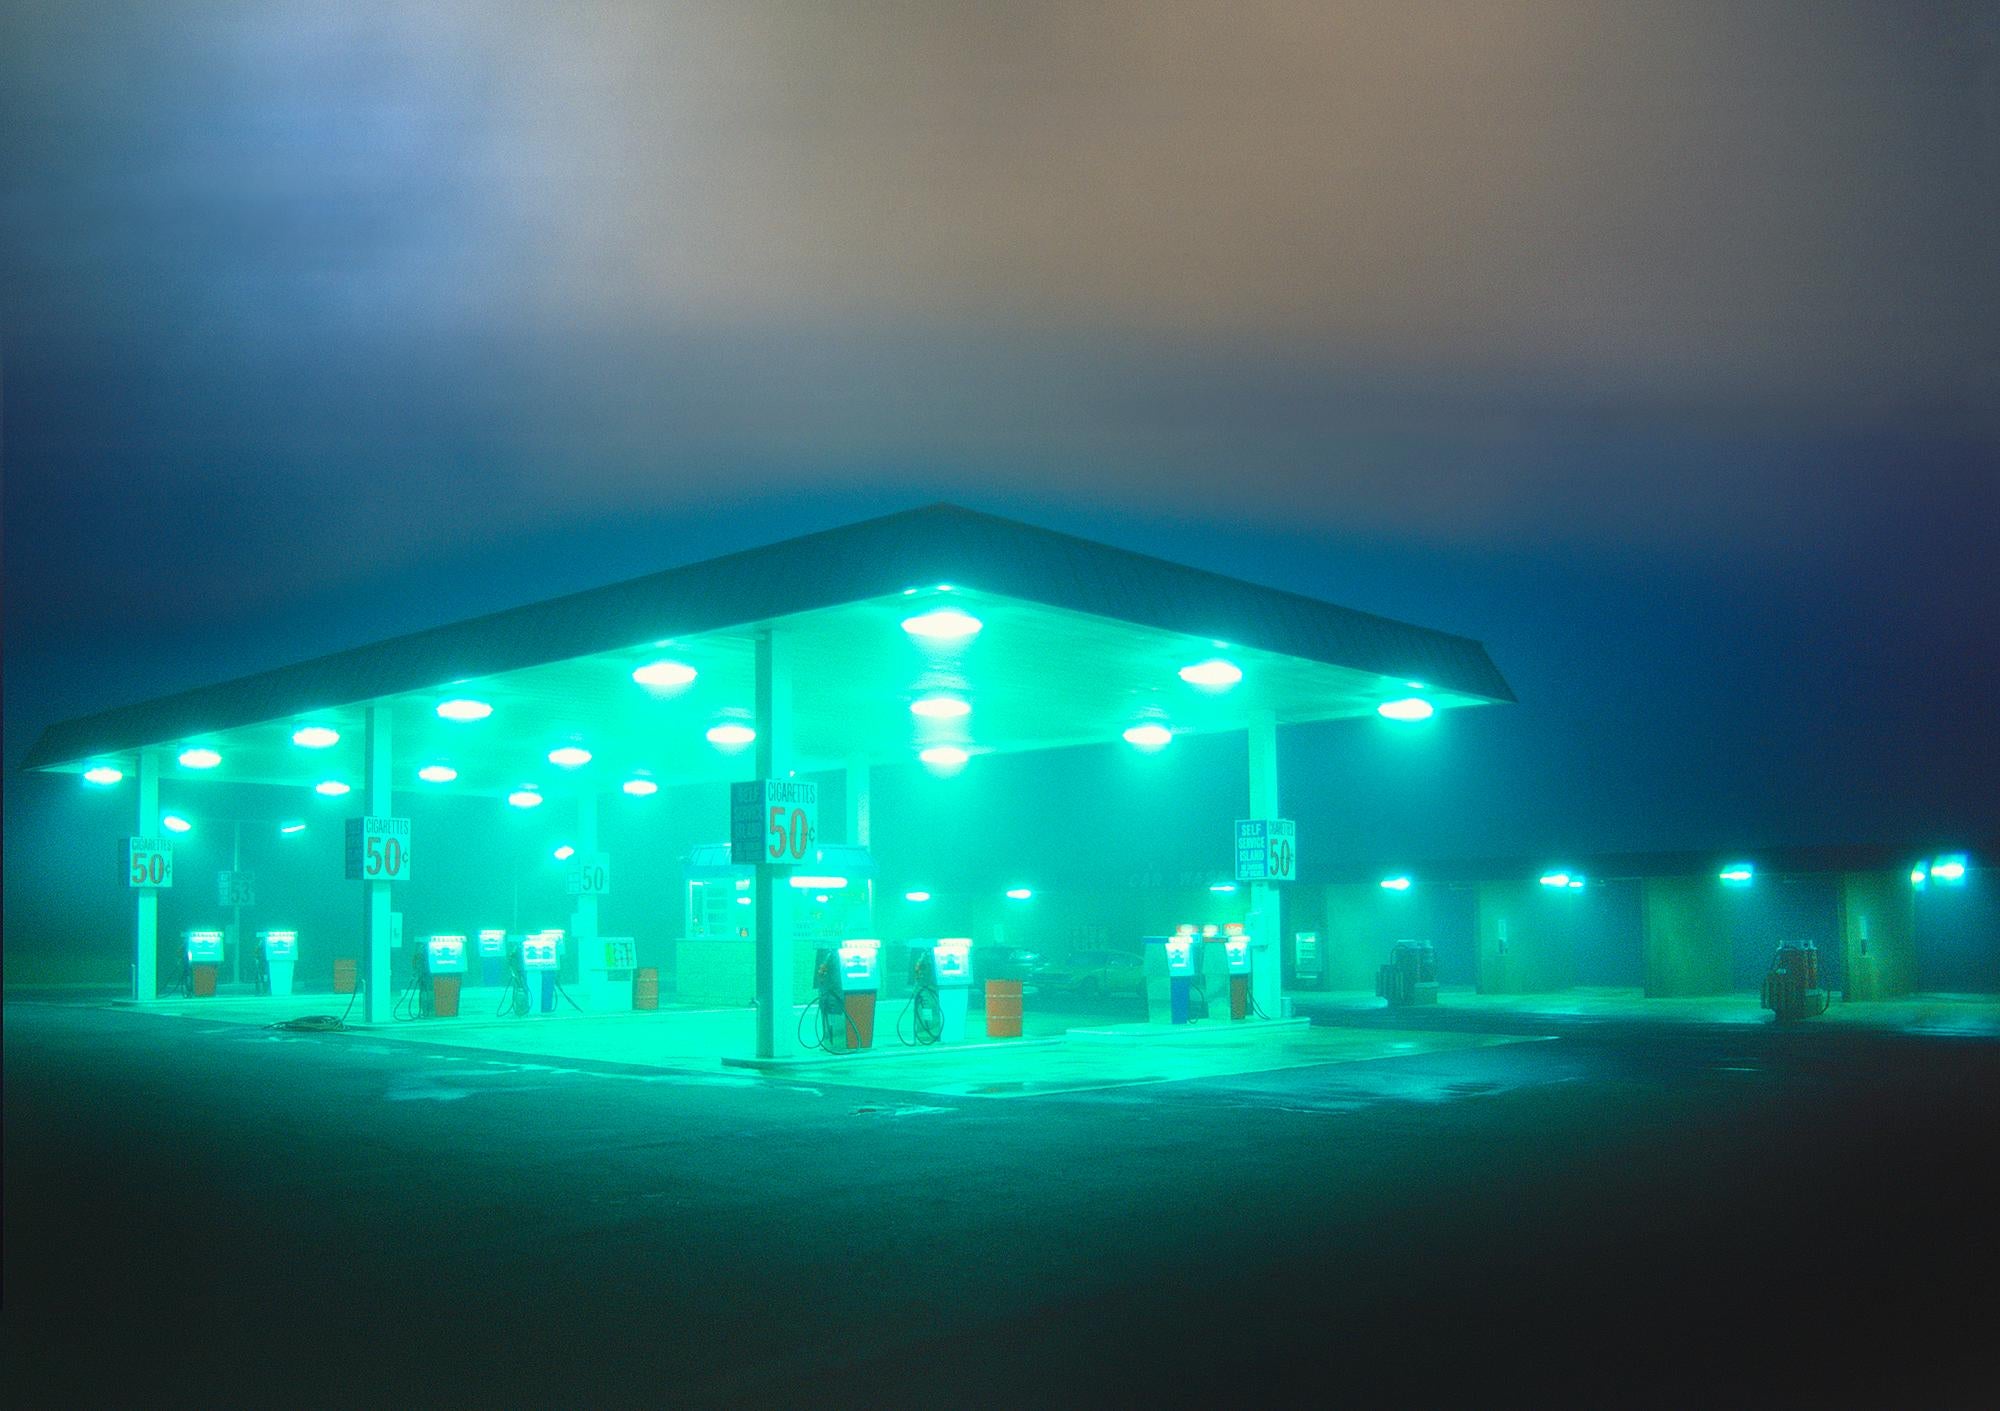 Mitchell Funk Landscape Photograph - Surreal Gas Station on a Foggy Night with Green Lights. Close Encounters 